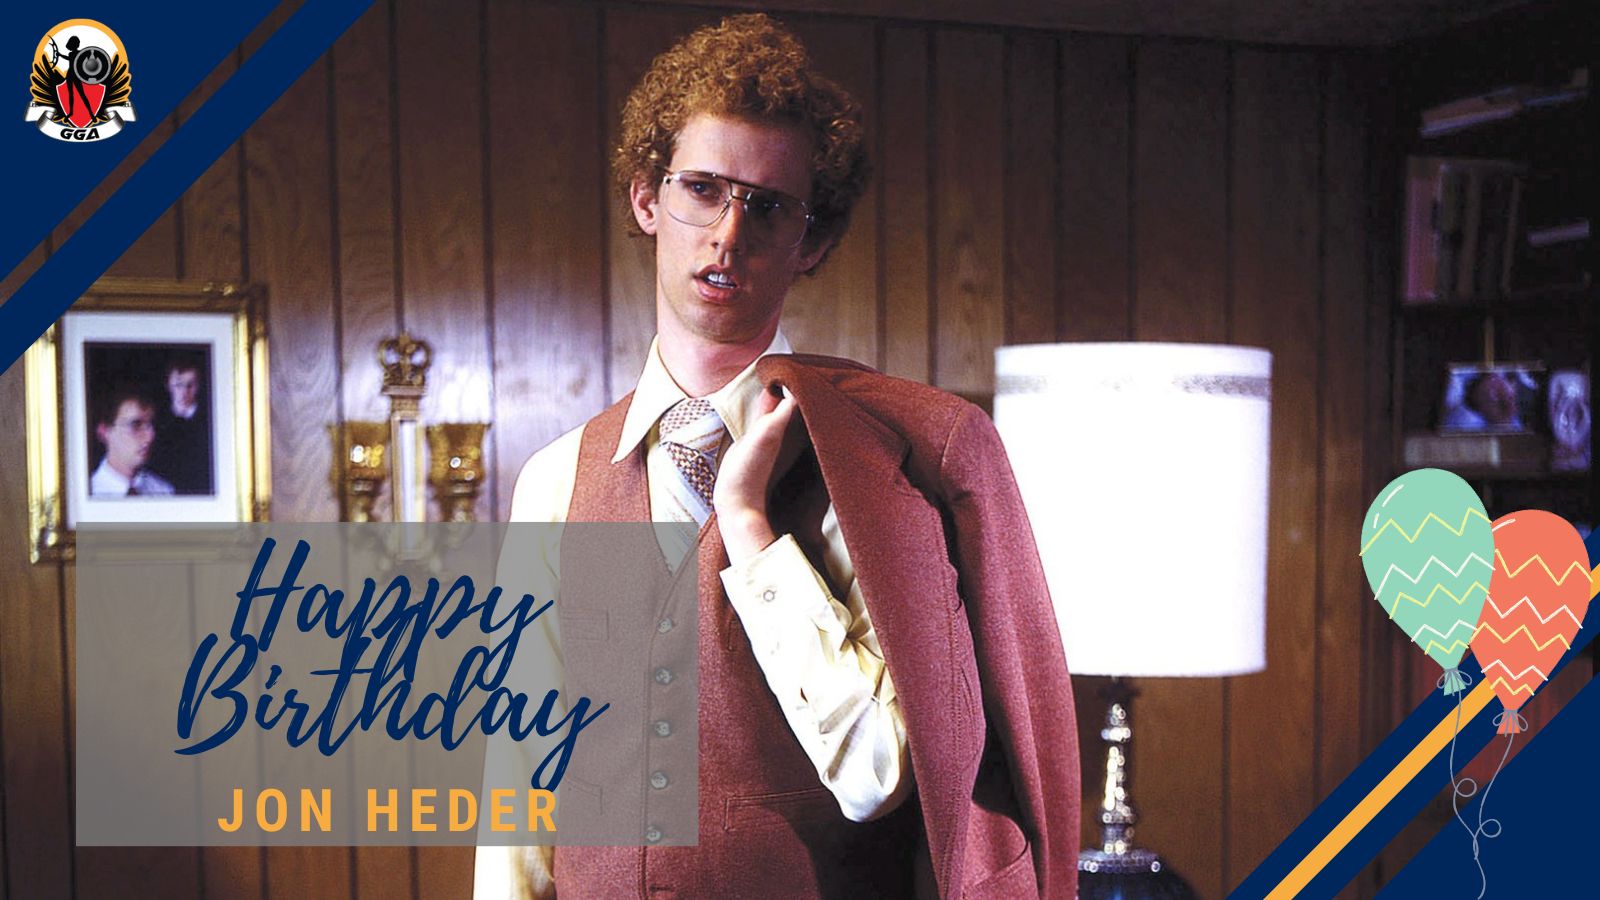 Happy Birthday, Jon Heder!  What role of his is your favorite?  